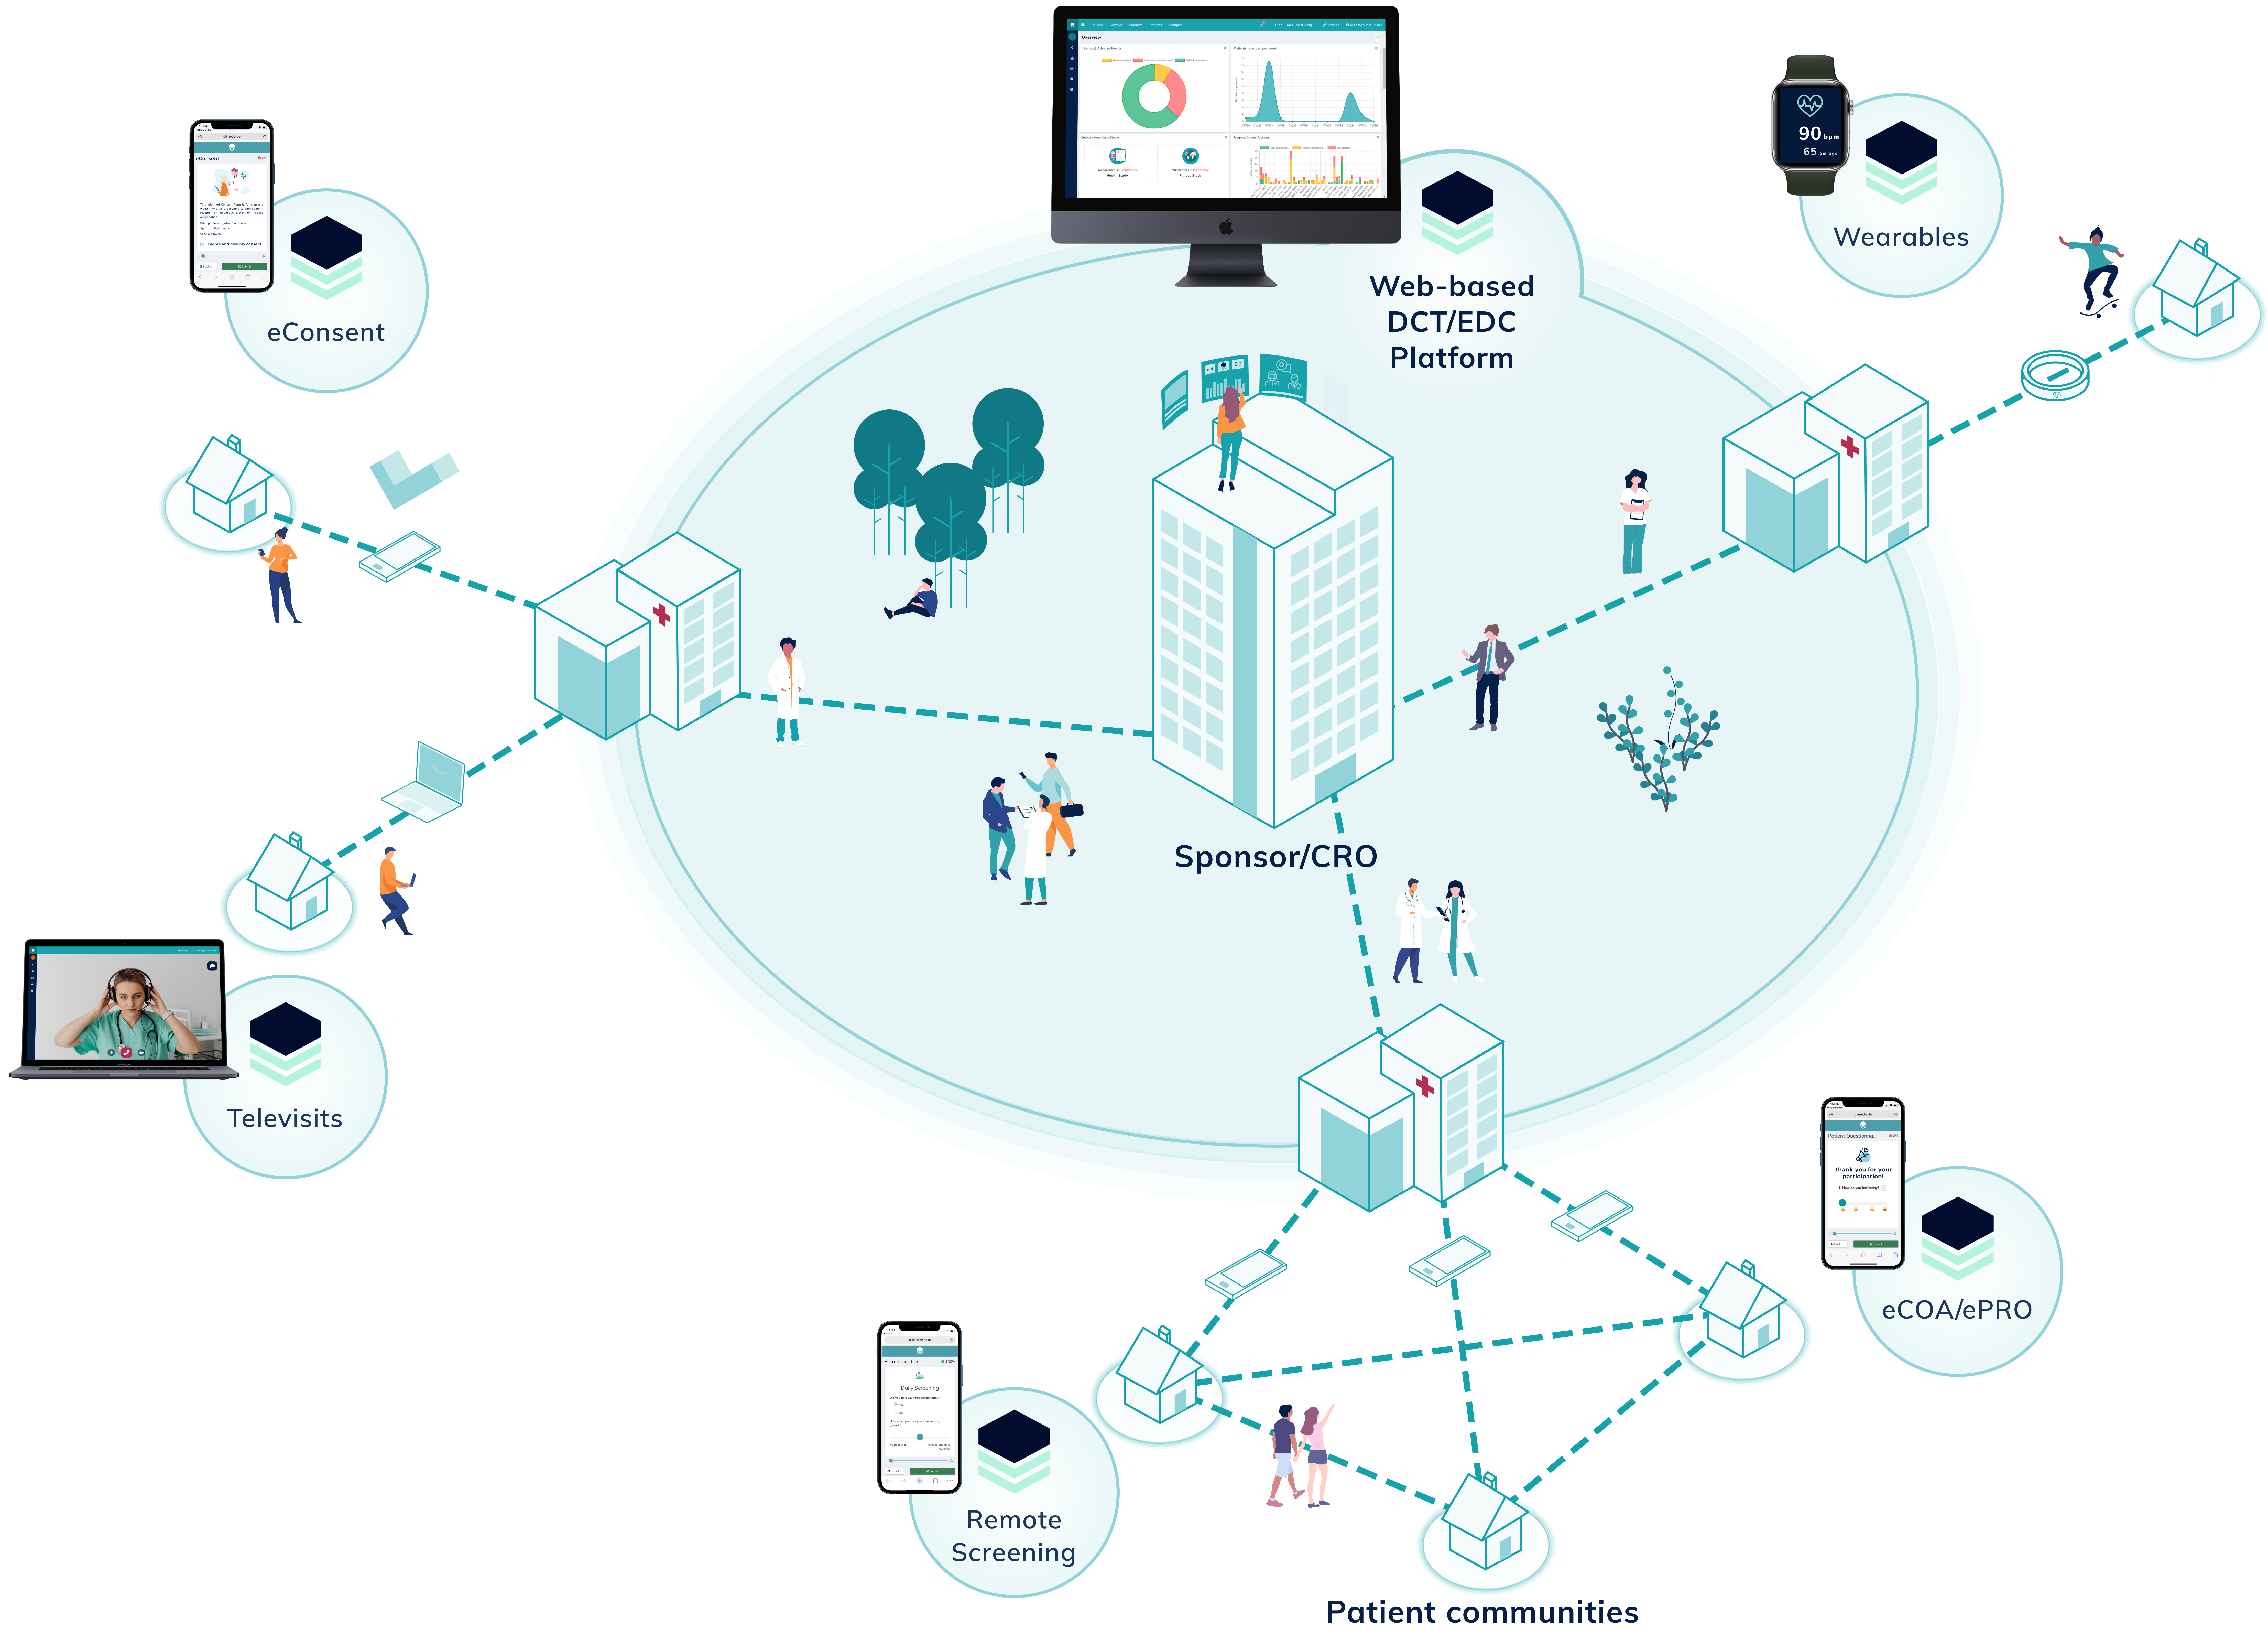 Illustration depicting Climedo's ecosystem including Web-based DCT/EDC Platform, eConsent, Telehealth, Remote Screening, eCOA/ePRO and Wearables. All those elements are connected.